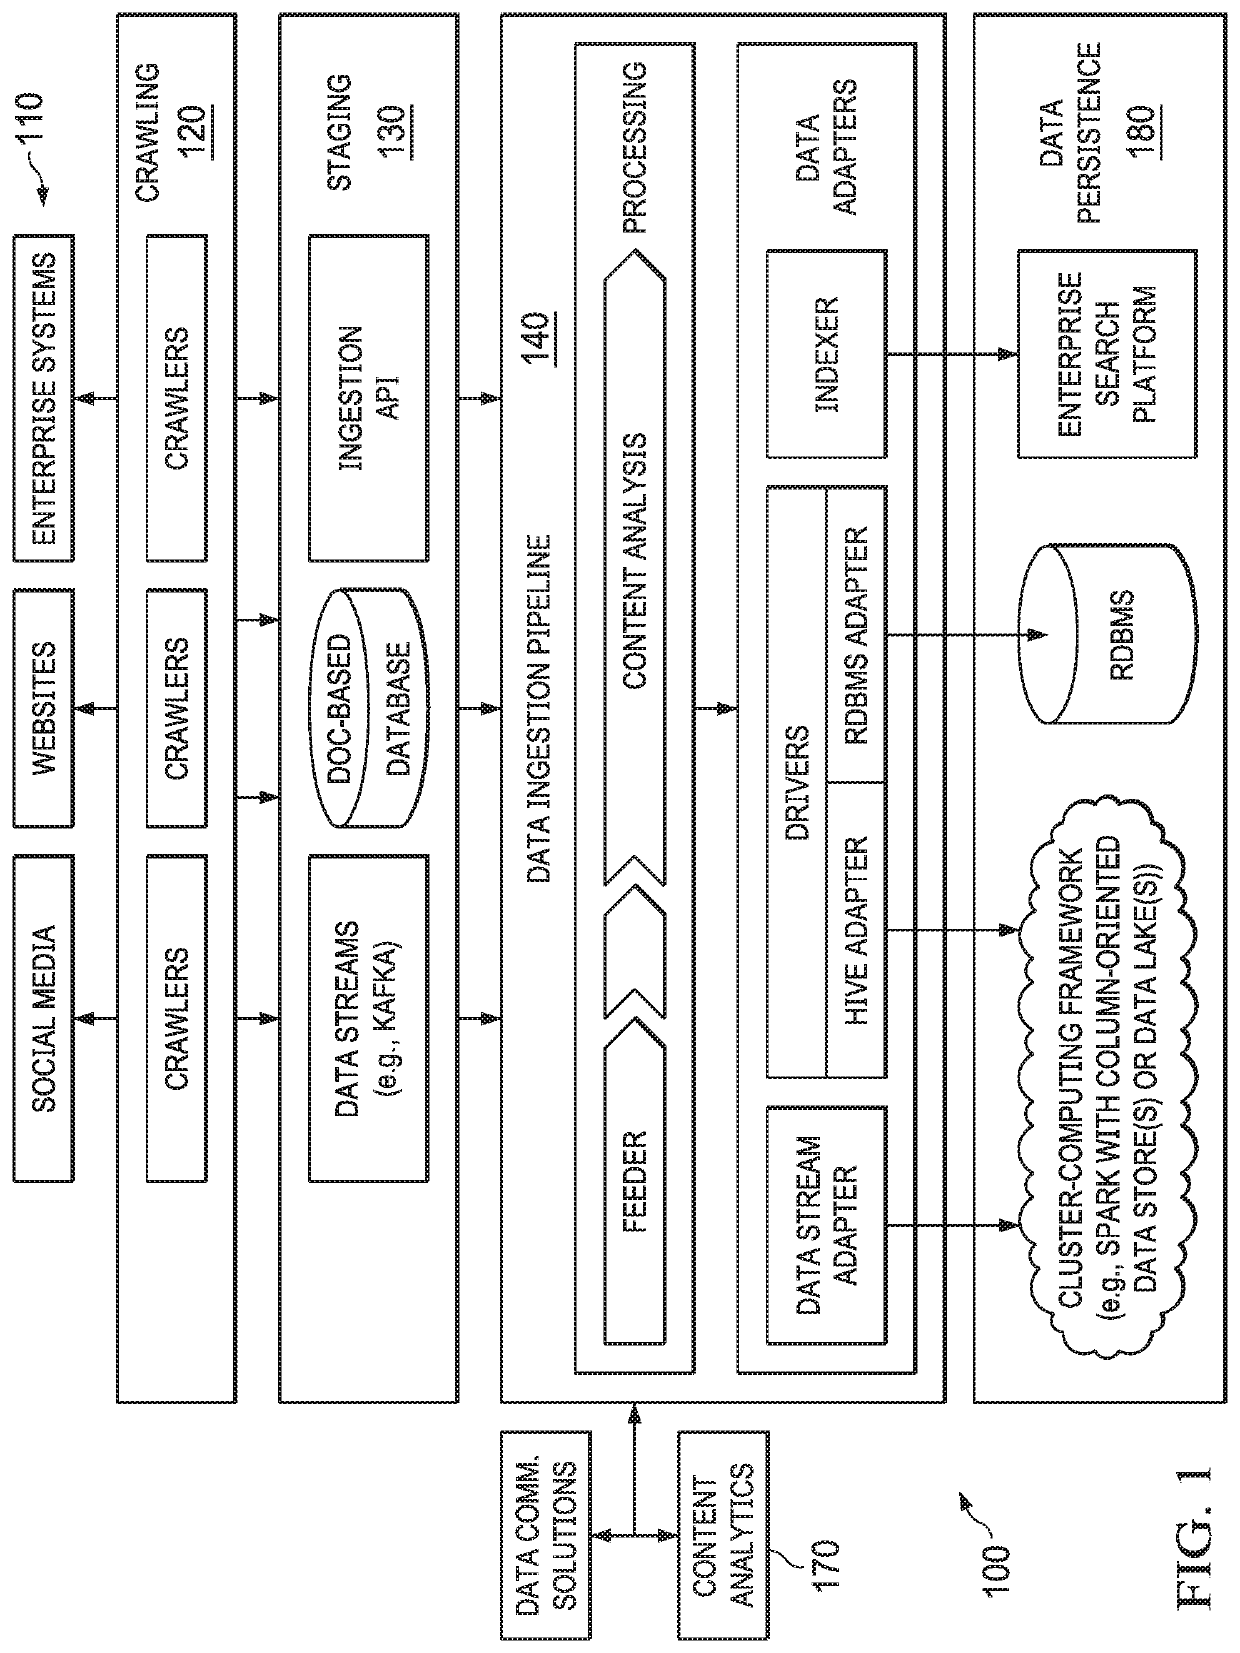 Real-time monitoring and reporting systems and methods for information access platform